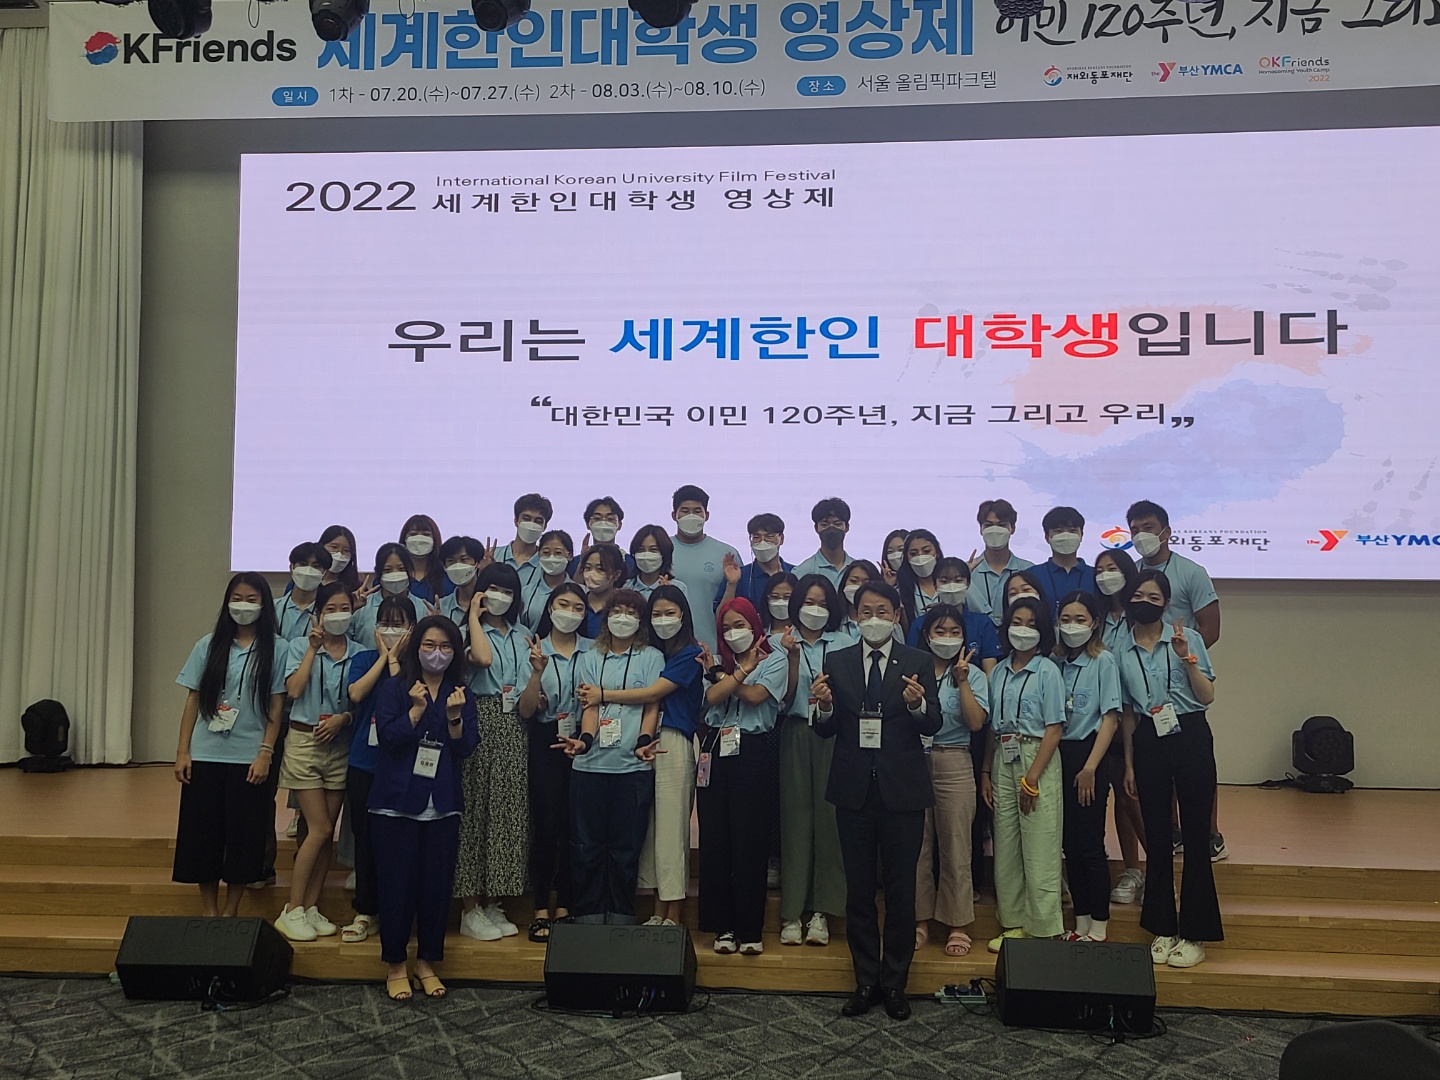 A commemorative photograph of Team Gongju and the judges after the first preliminary round of the World Korean University Student Film Festival